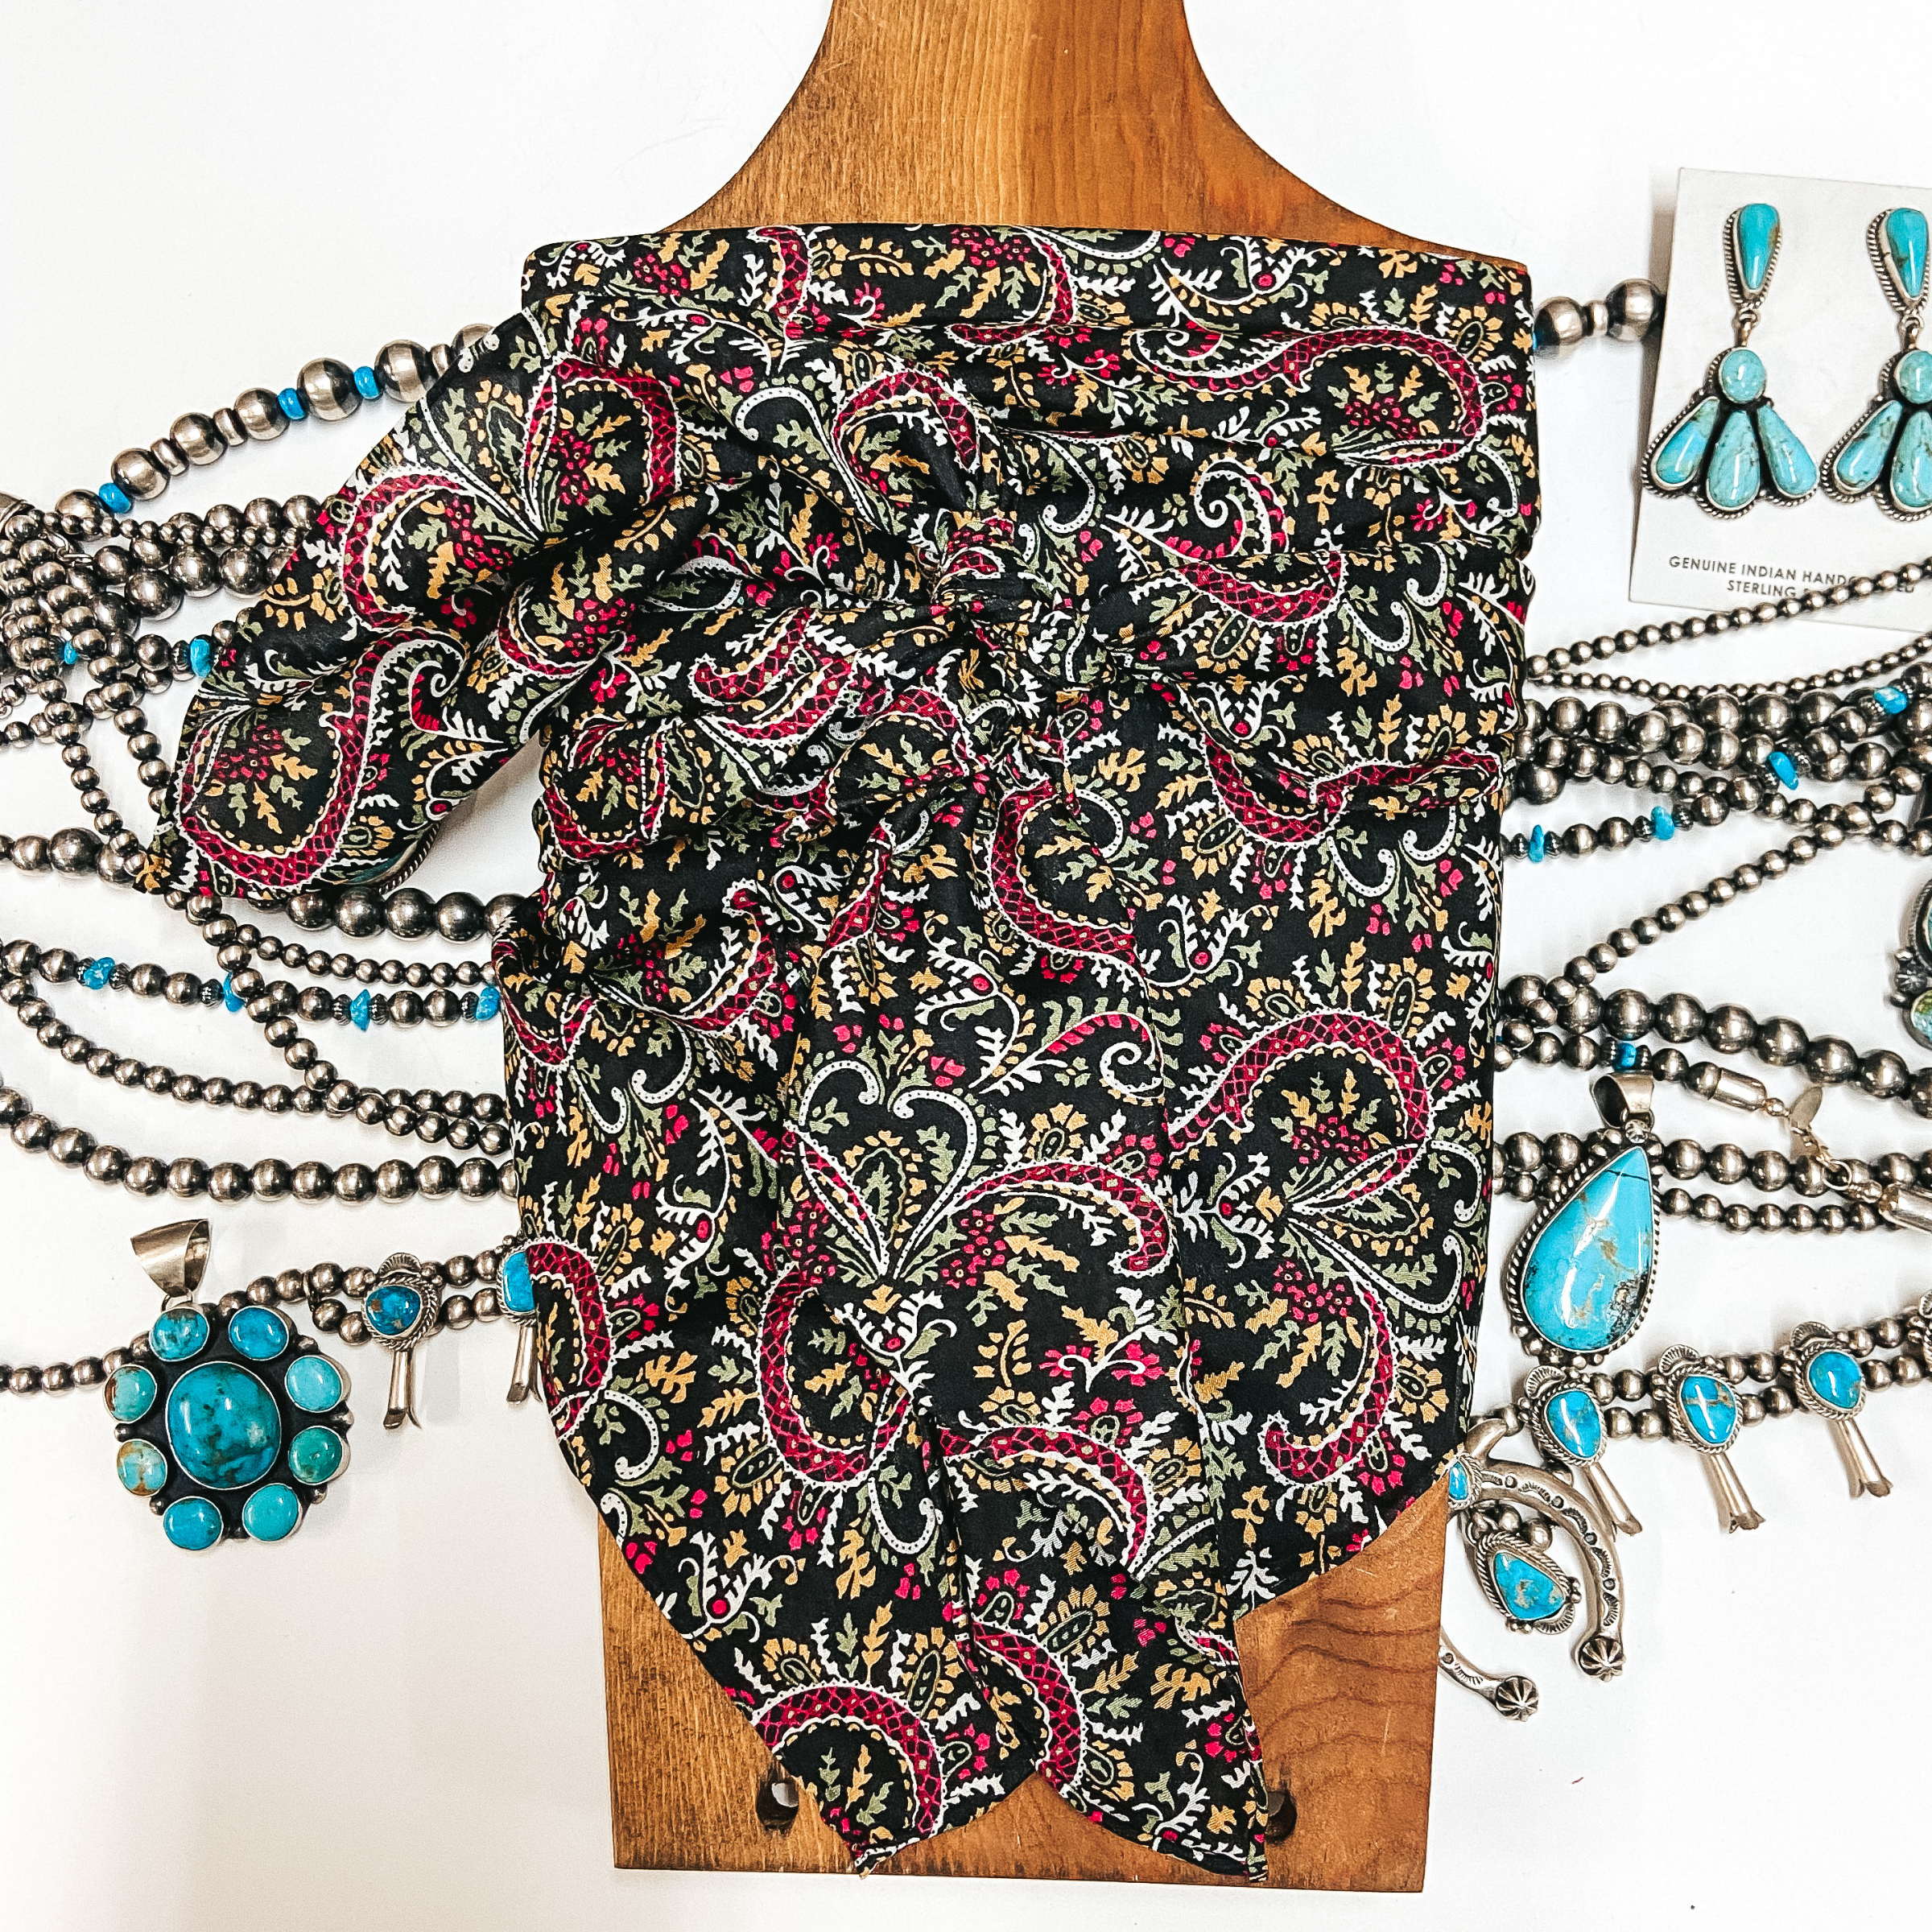 A black wild rag with multi colored paisley print tied around a wooden display. Pictured on white background with silver and turquoise jewelry.